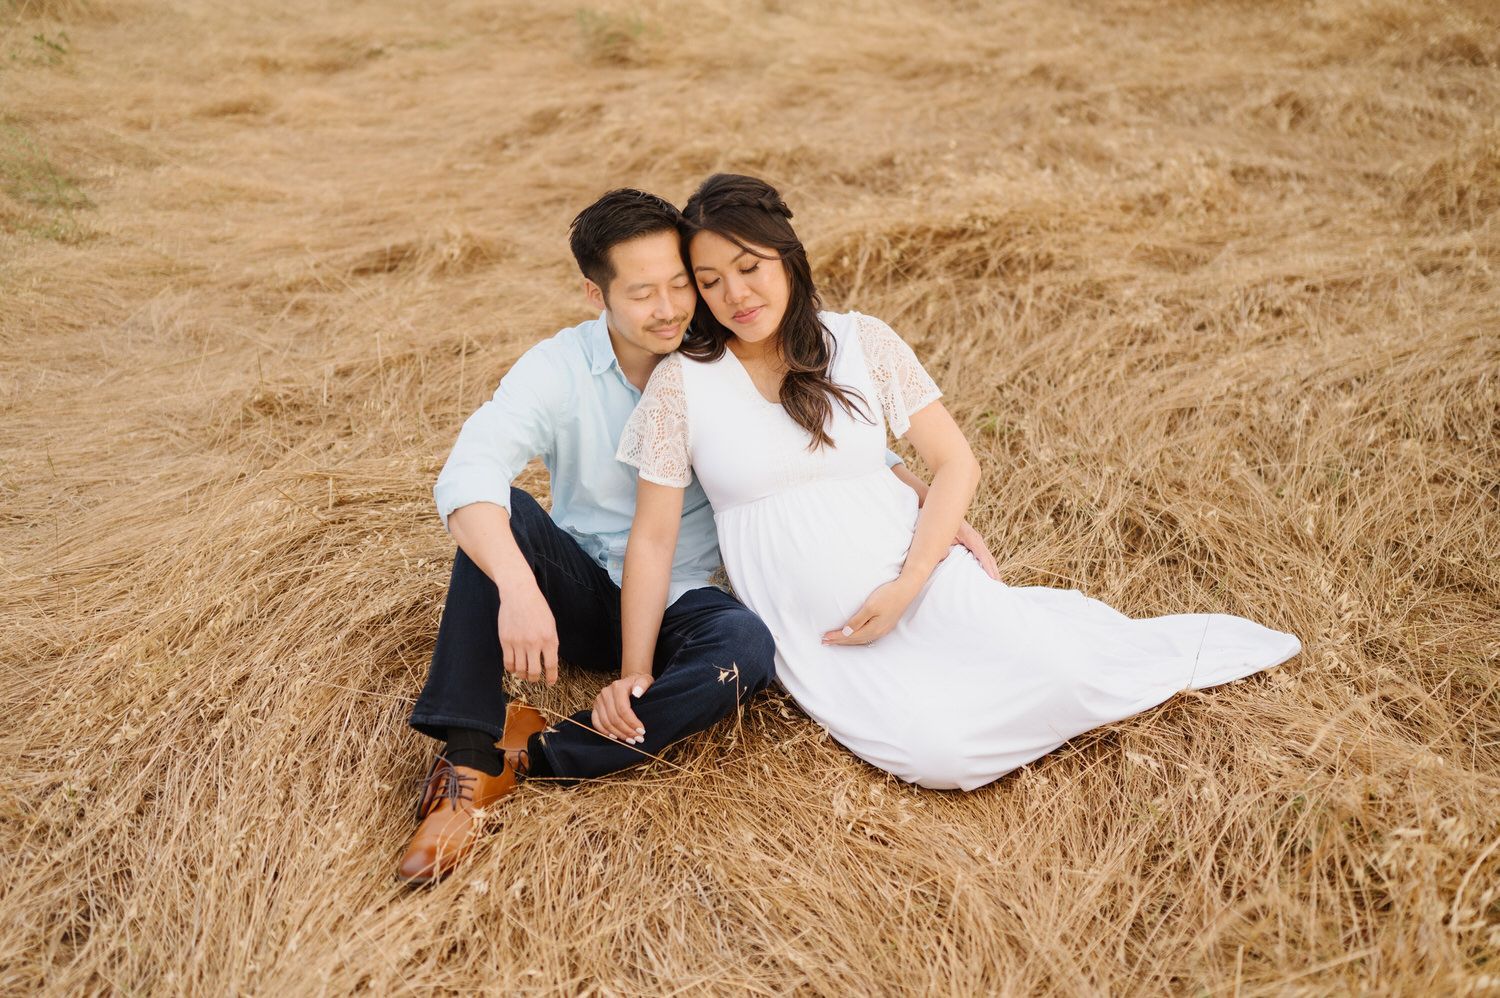 A man and a pregnant woman are sitting on the ground in a field.